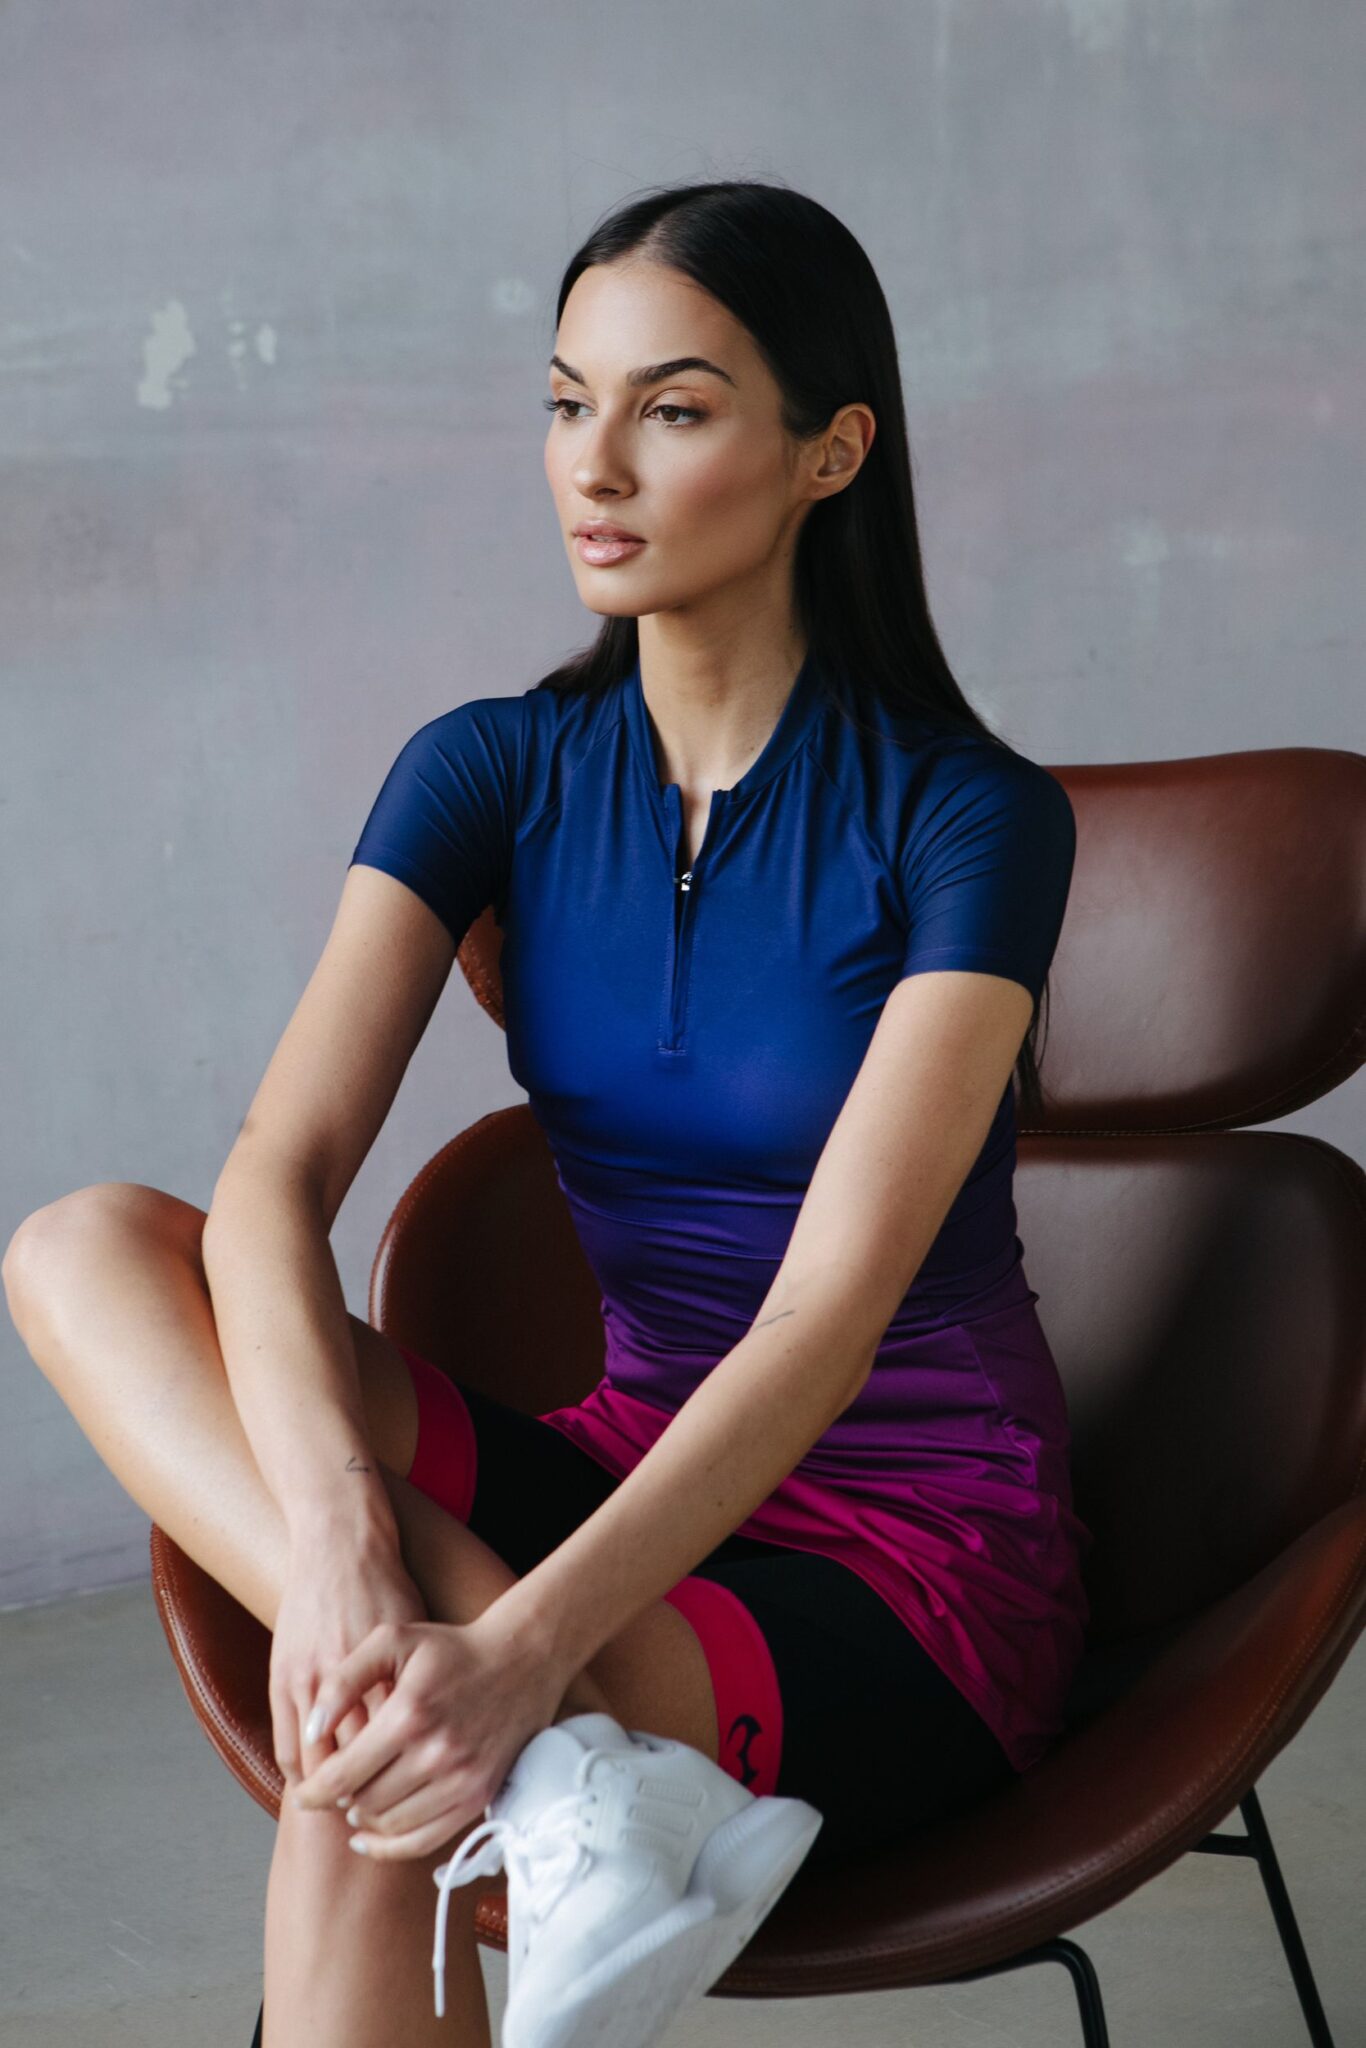 A model in a navy blue and purple sports dress with shorts is sitting on a chair.